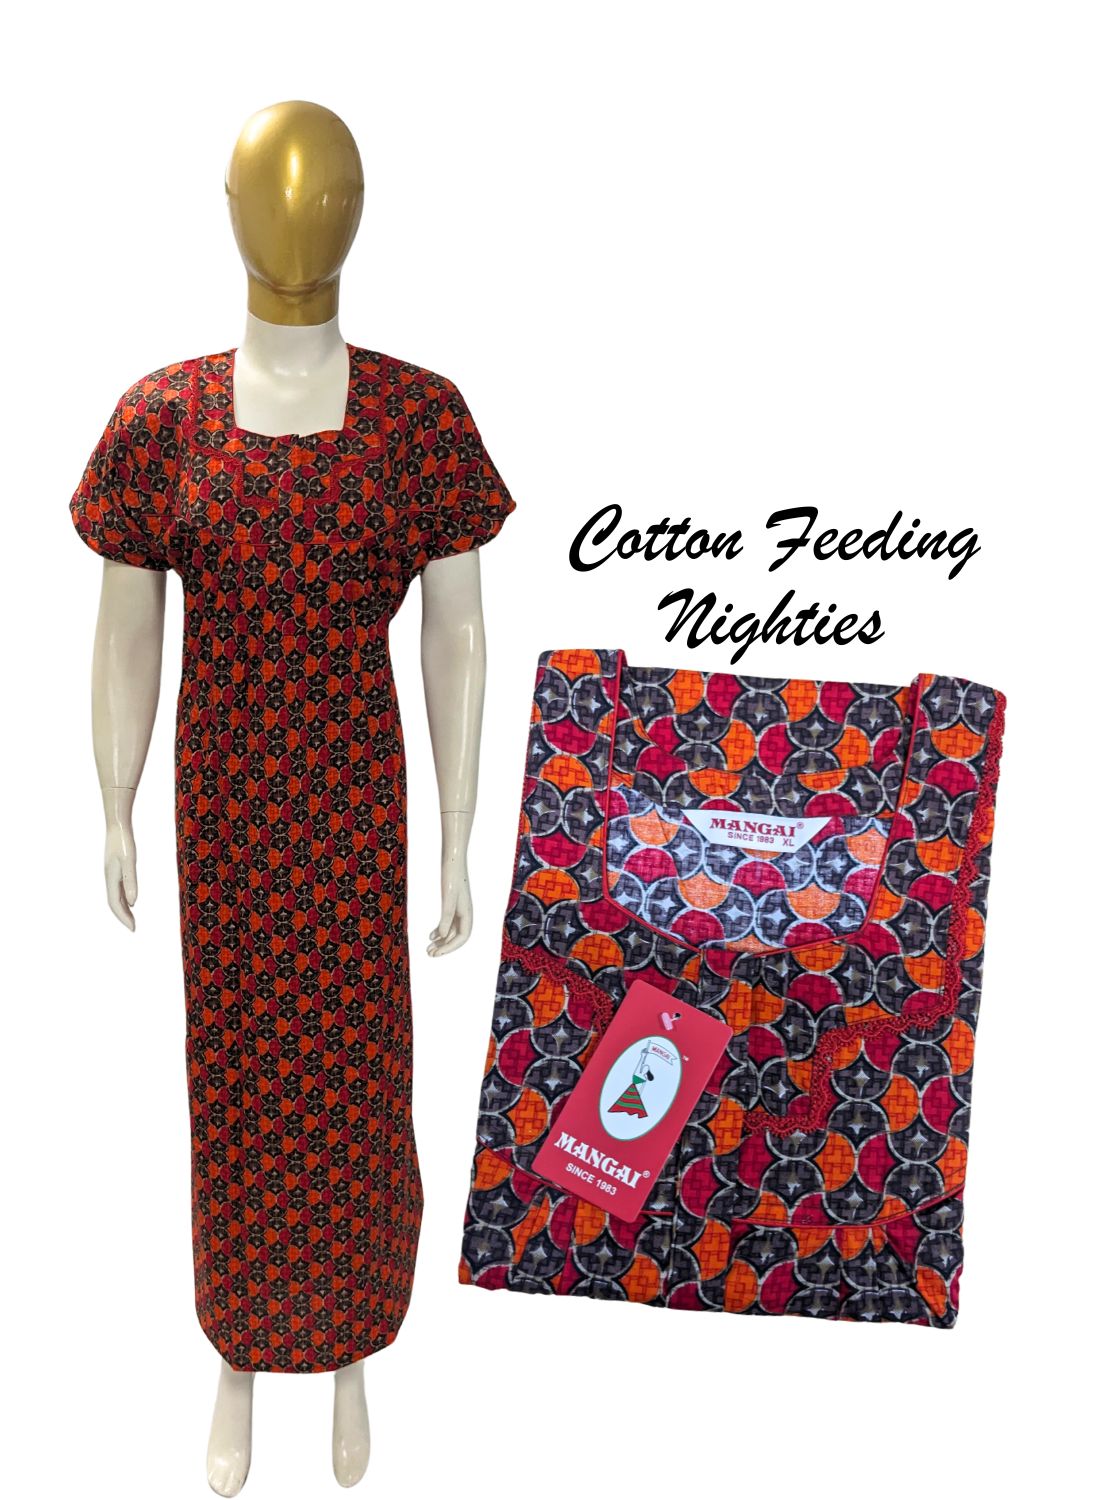 MANGAI Cotton Printed Feeding Nighties | Soft Cotton | Above Knee Length Covered | Front Open Zipper| Vertical Feeding Zipper | Feeding Nighties